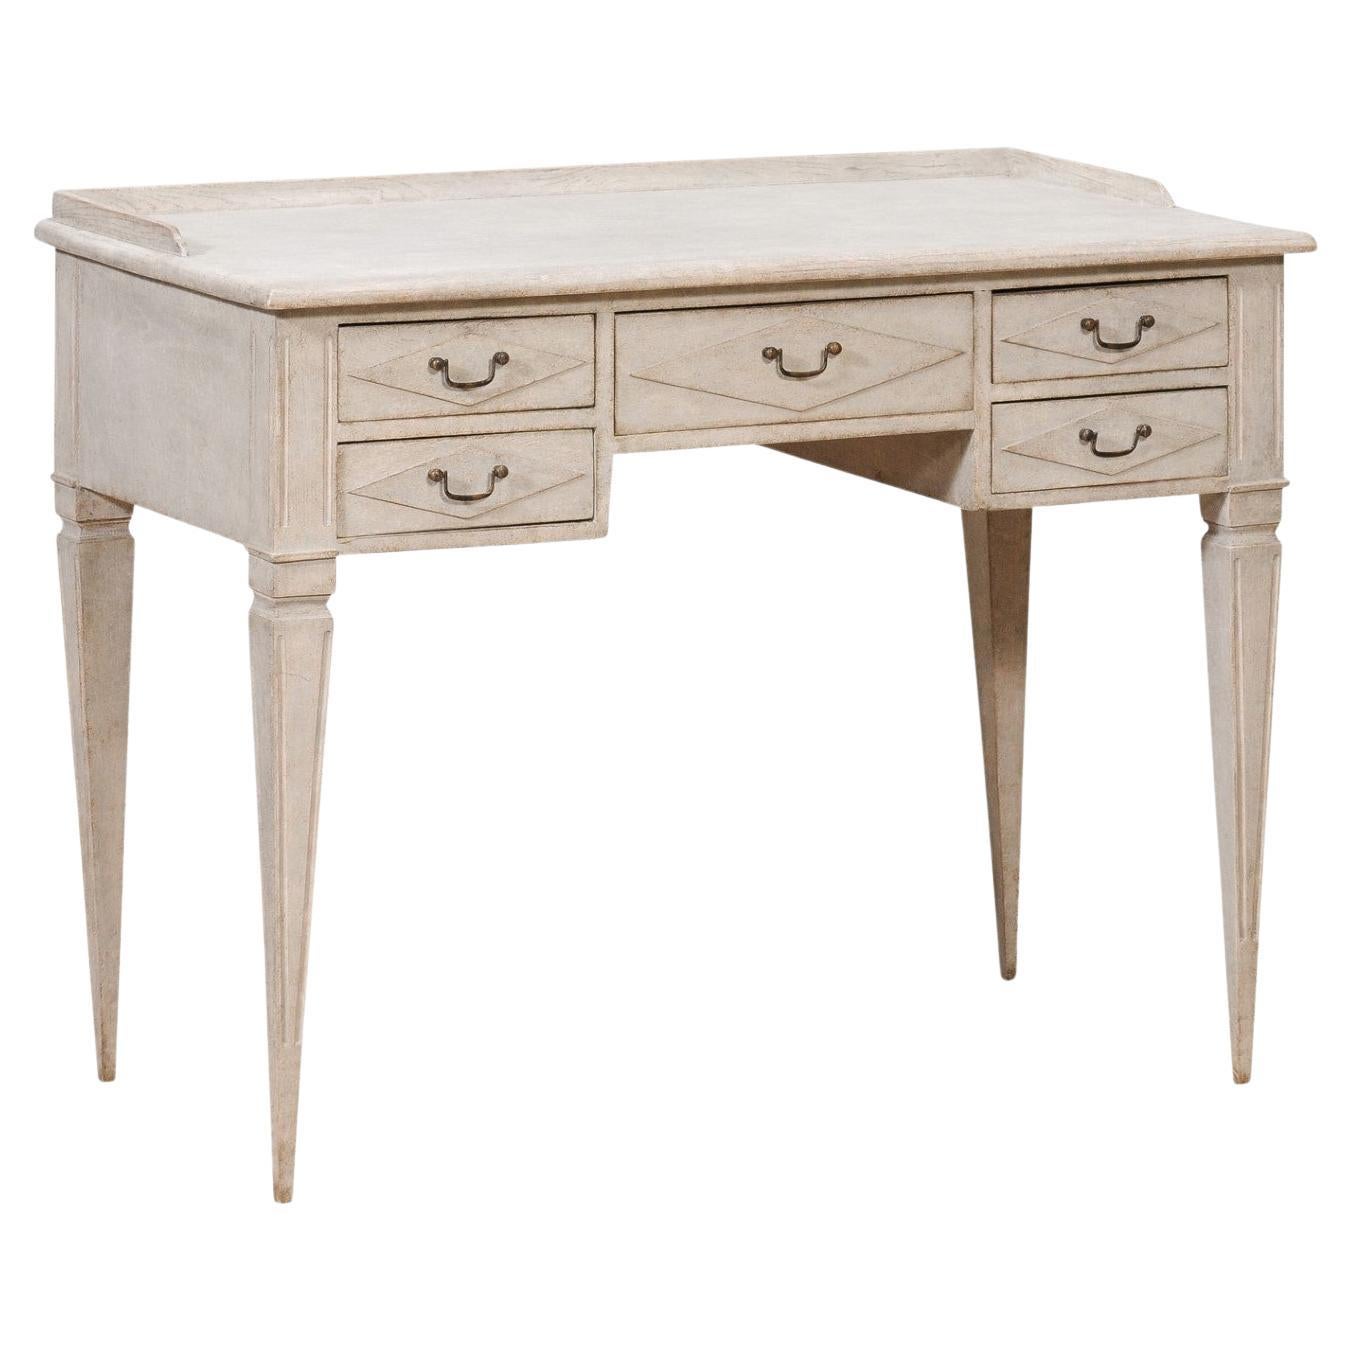 1880s Swedish Gustavian Style Painted Desk with Five Drawers and Tapered Legs For Sale